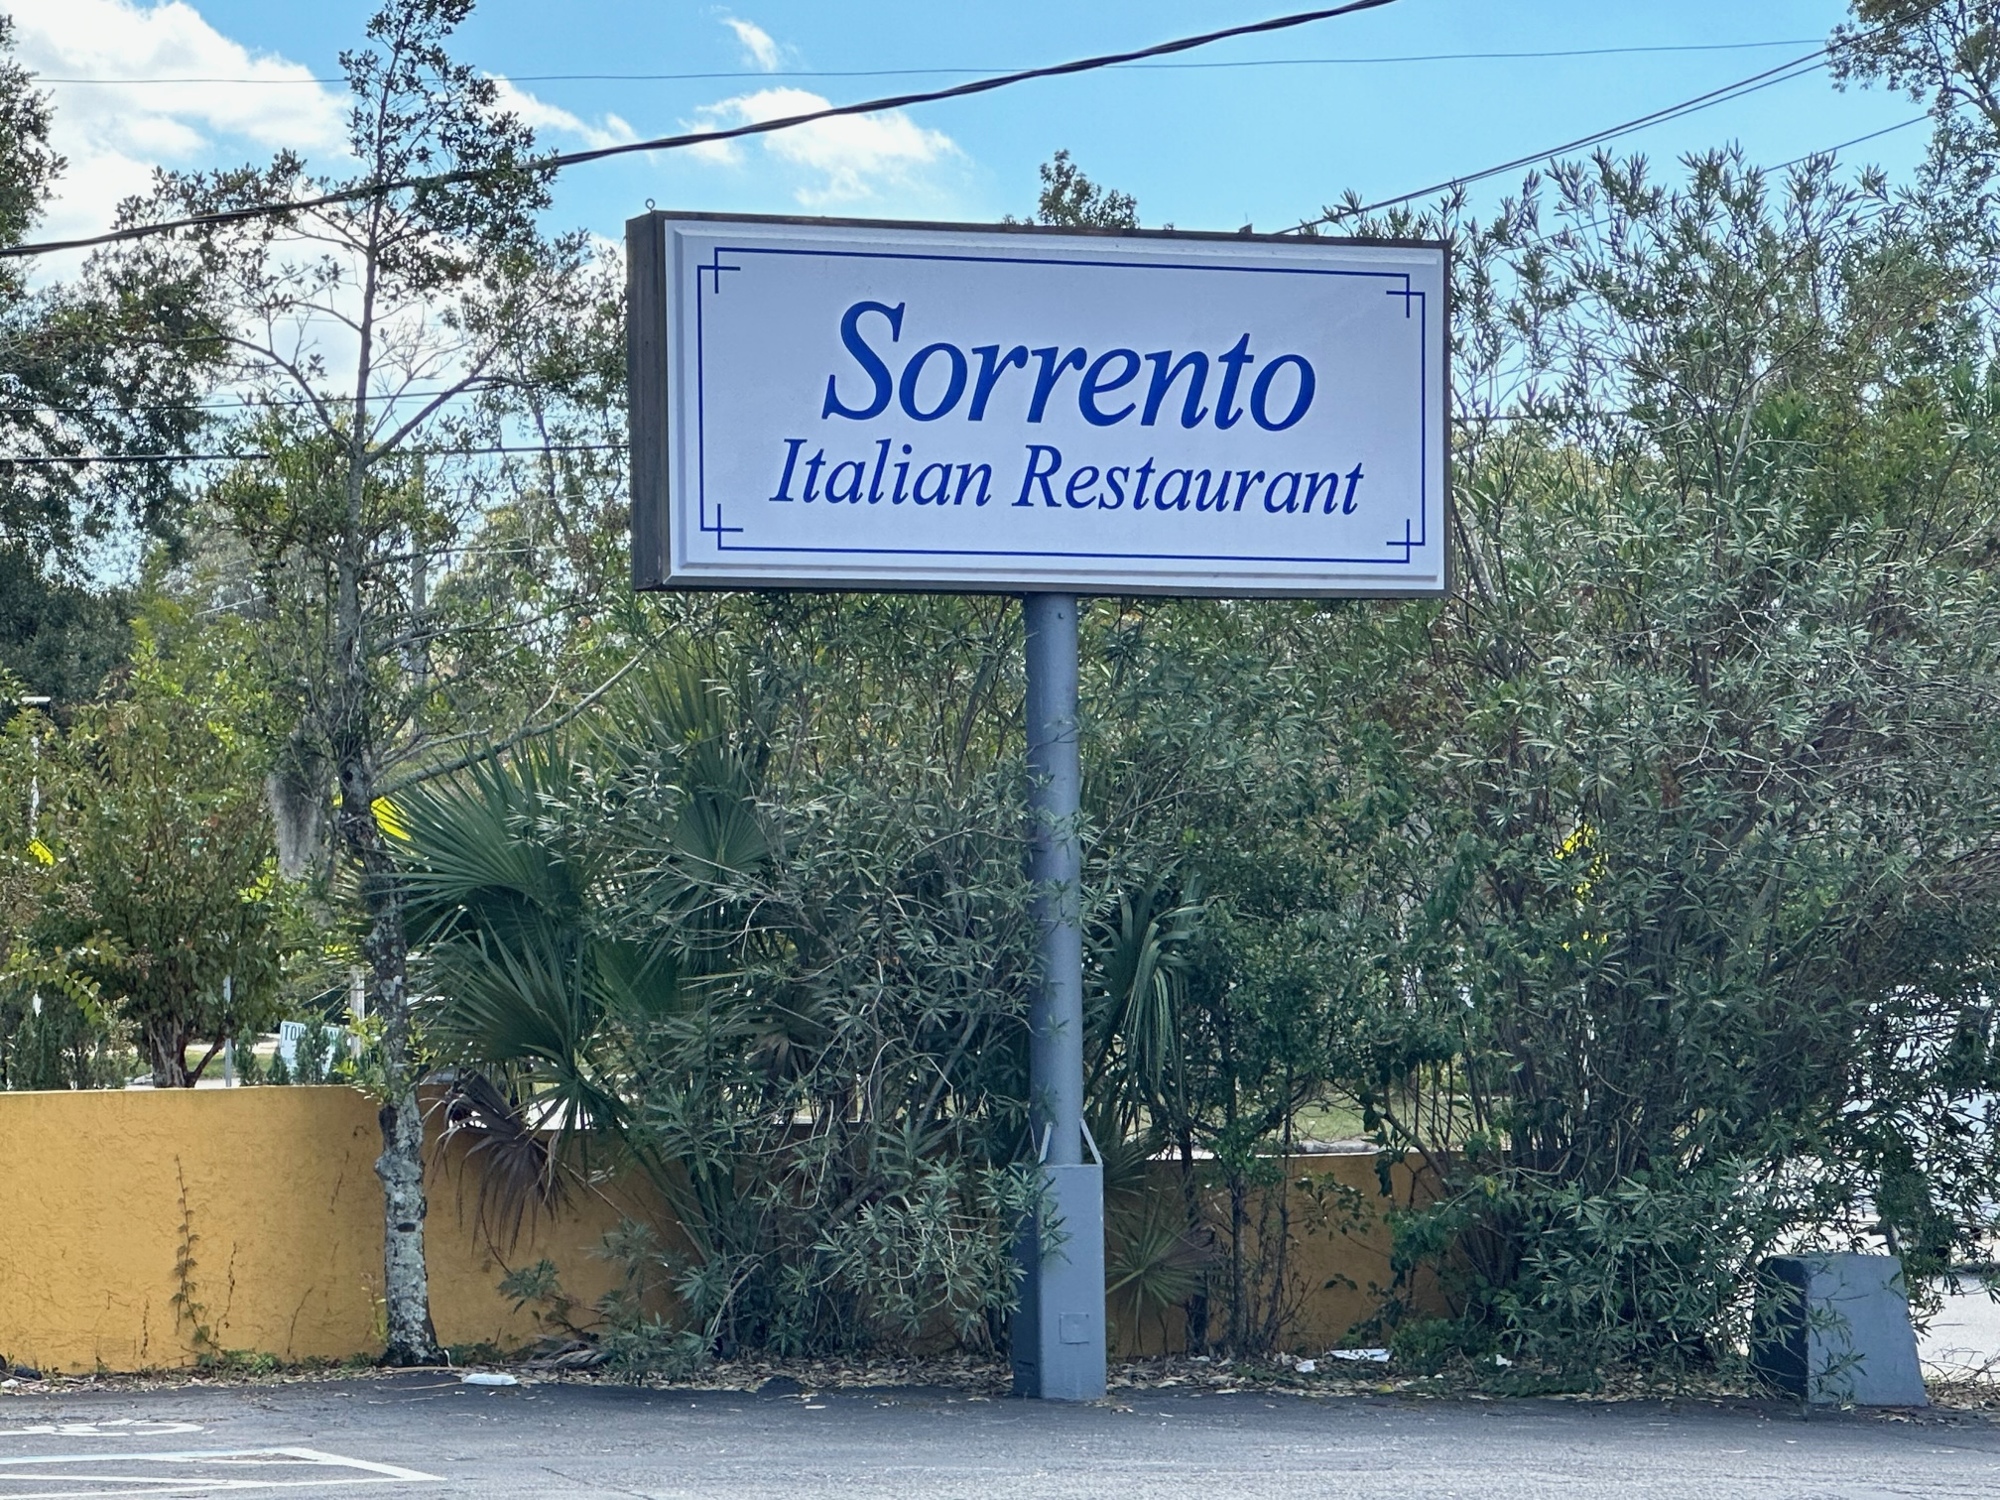 Sorrento Italian Restaurant closed Aug. 28 after it could not overcome pandemic challenges.